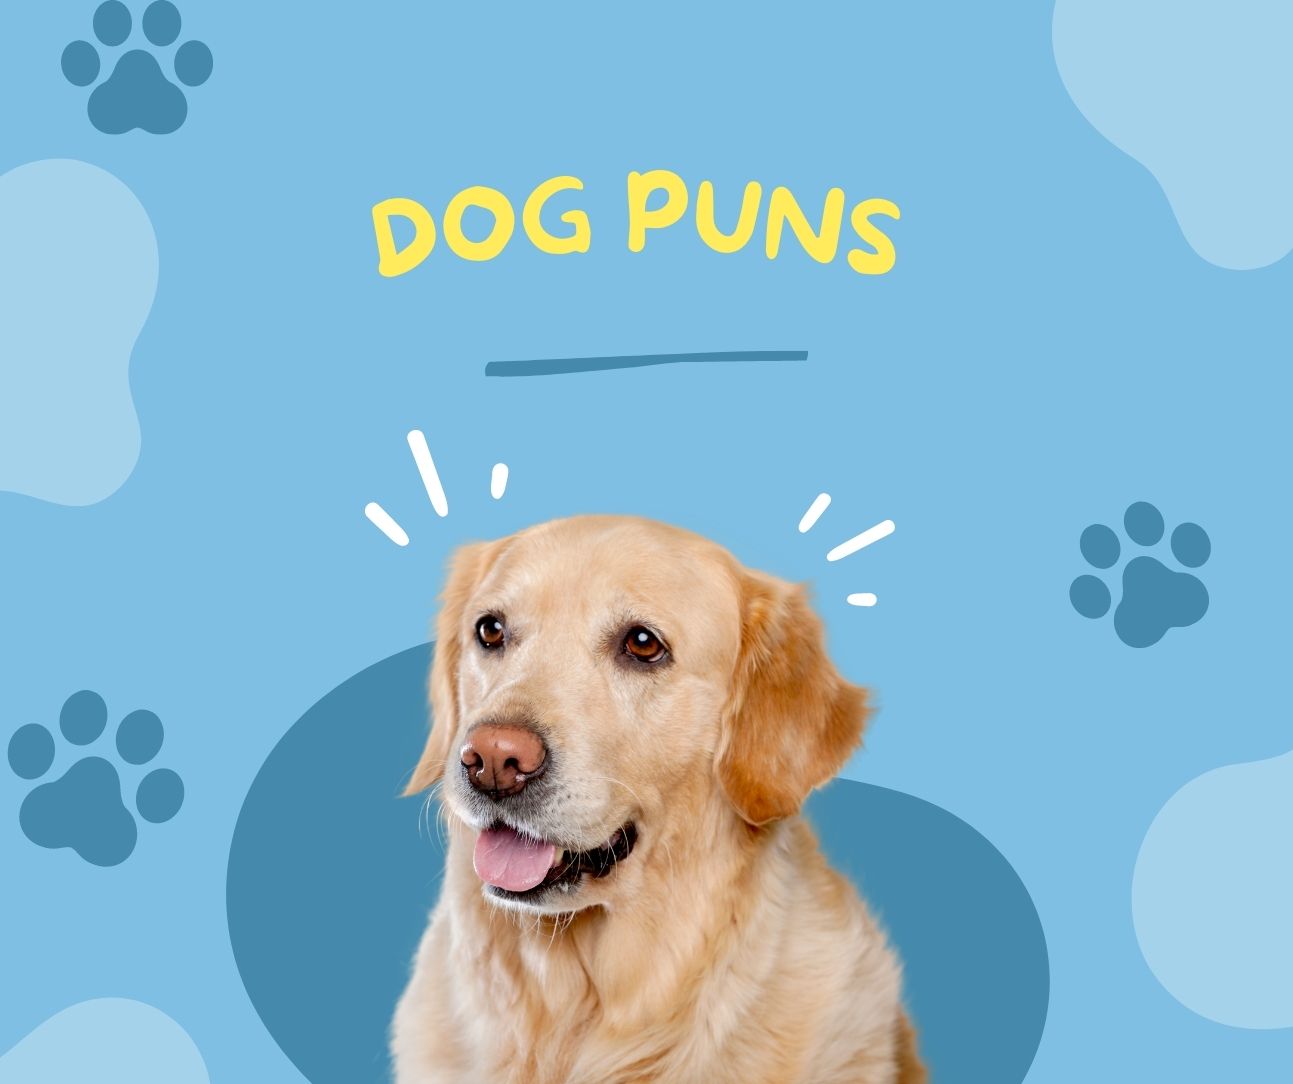 129 Hilarious Dog Puns That Will Make You Howl With Laughter